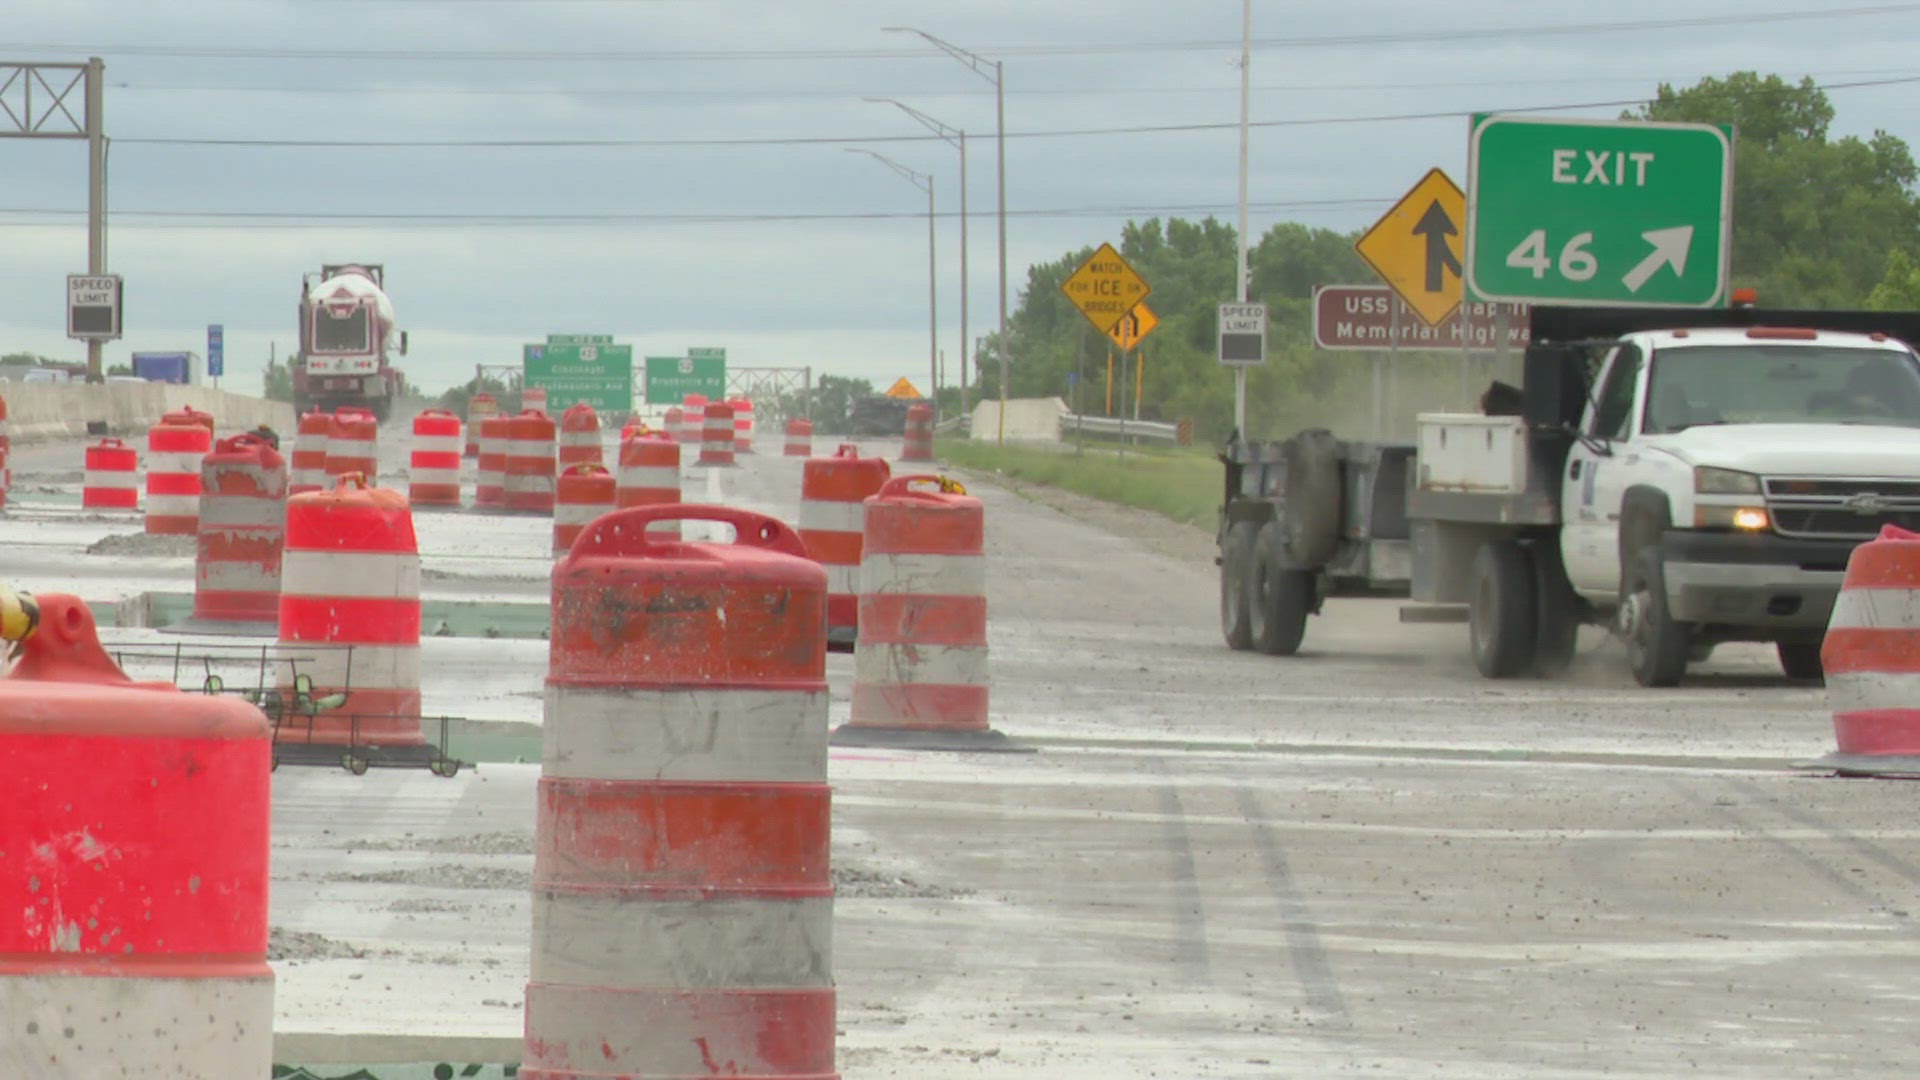 After this closure, crews will have a few weeks off, then do the same project on the northbound lanes starting July 12.